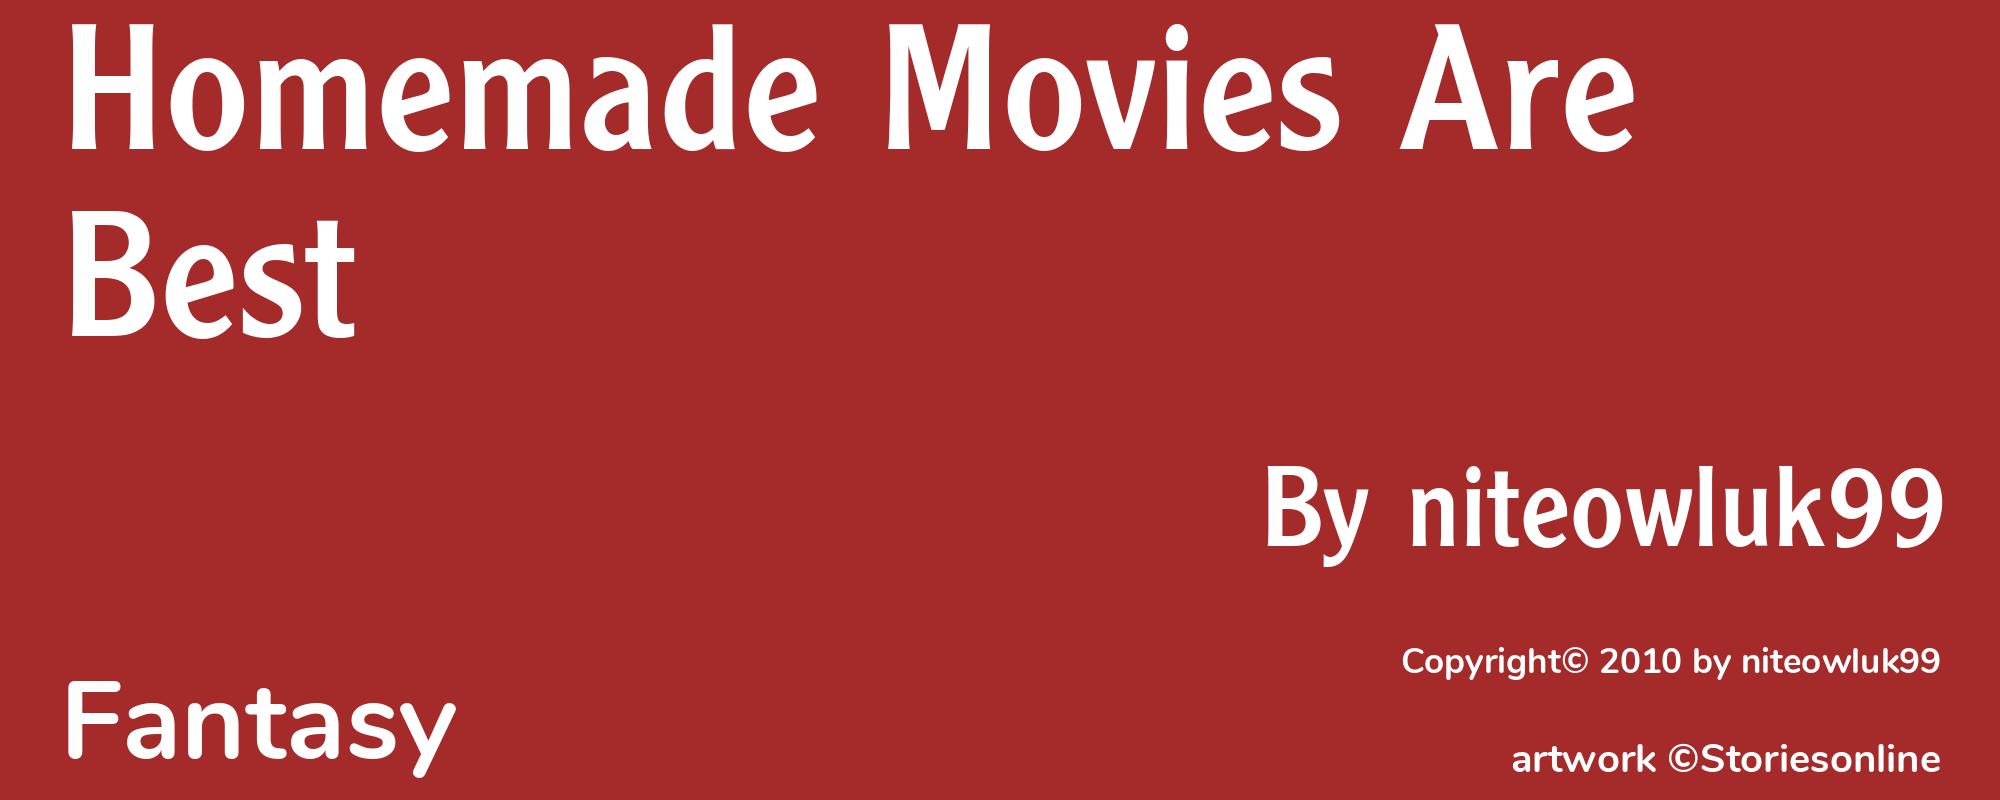 Homemade Movies Are Best - Cover